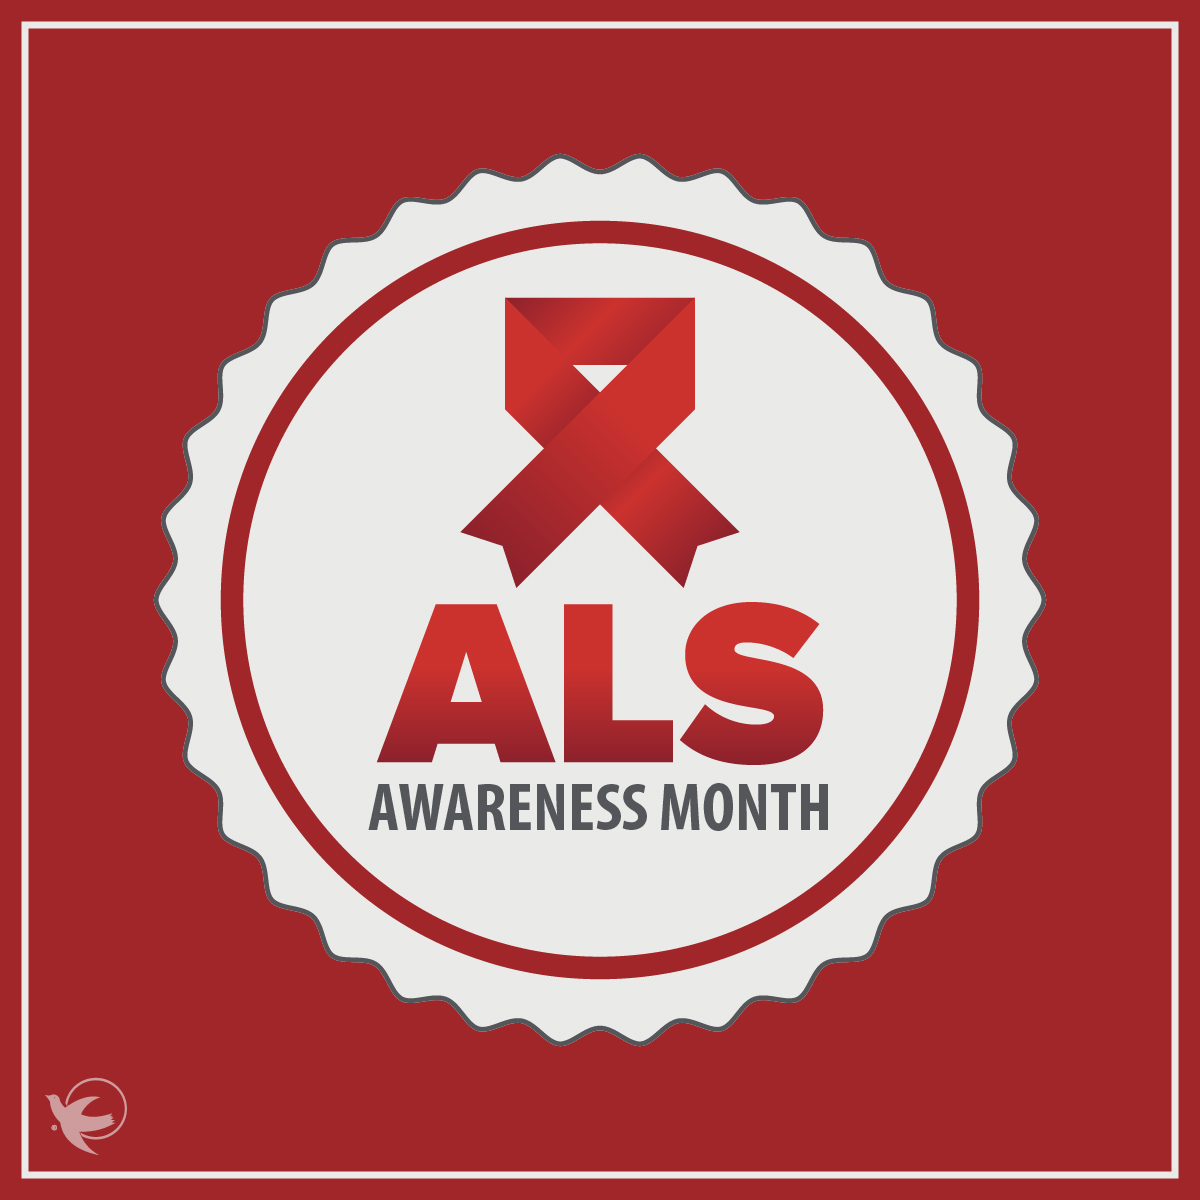 Amyotrophic Lateral Sclerosis is a progressive neurodegenerative disease affecting nerve cells in the brain and spinal cord. #ALSAwarenessMonth #FightALS #VisitingAngelsofRI #homecare #CNA #caregiver #rhodeisland